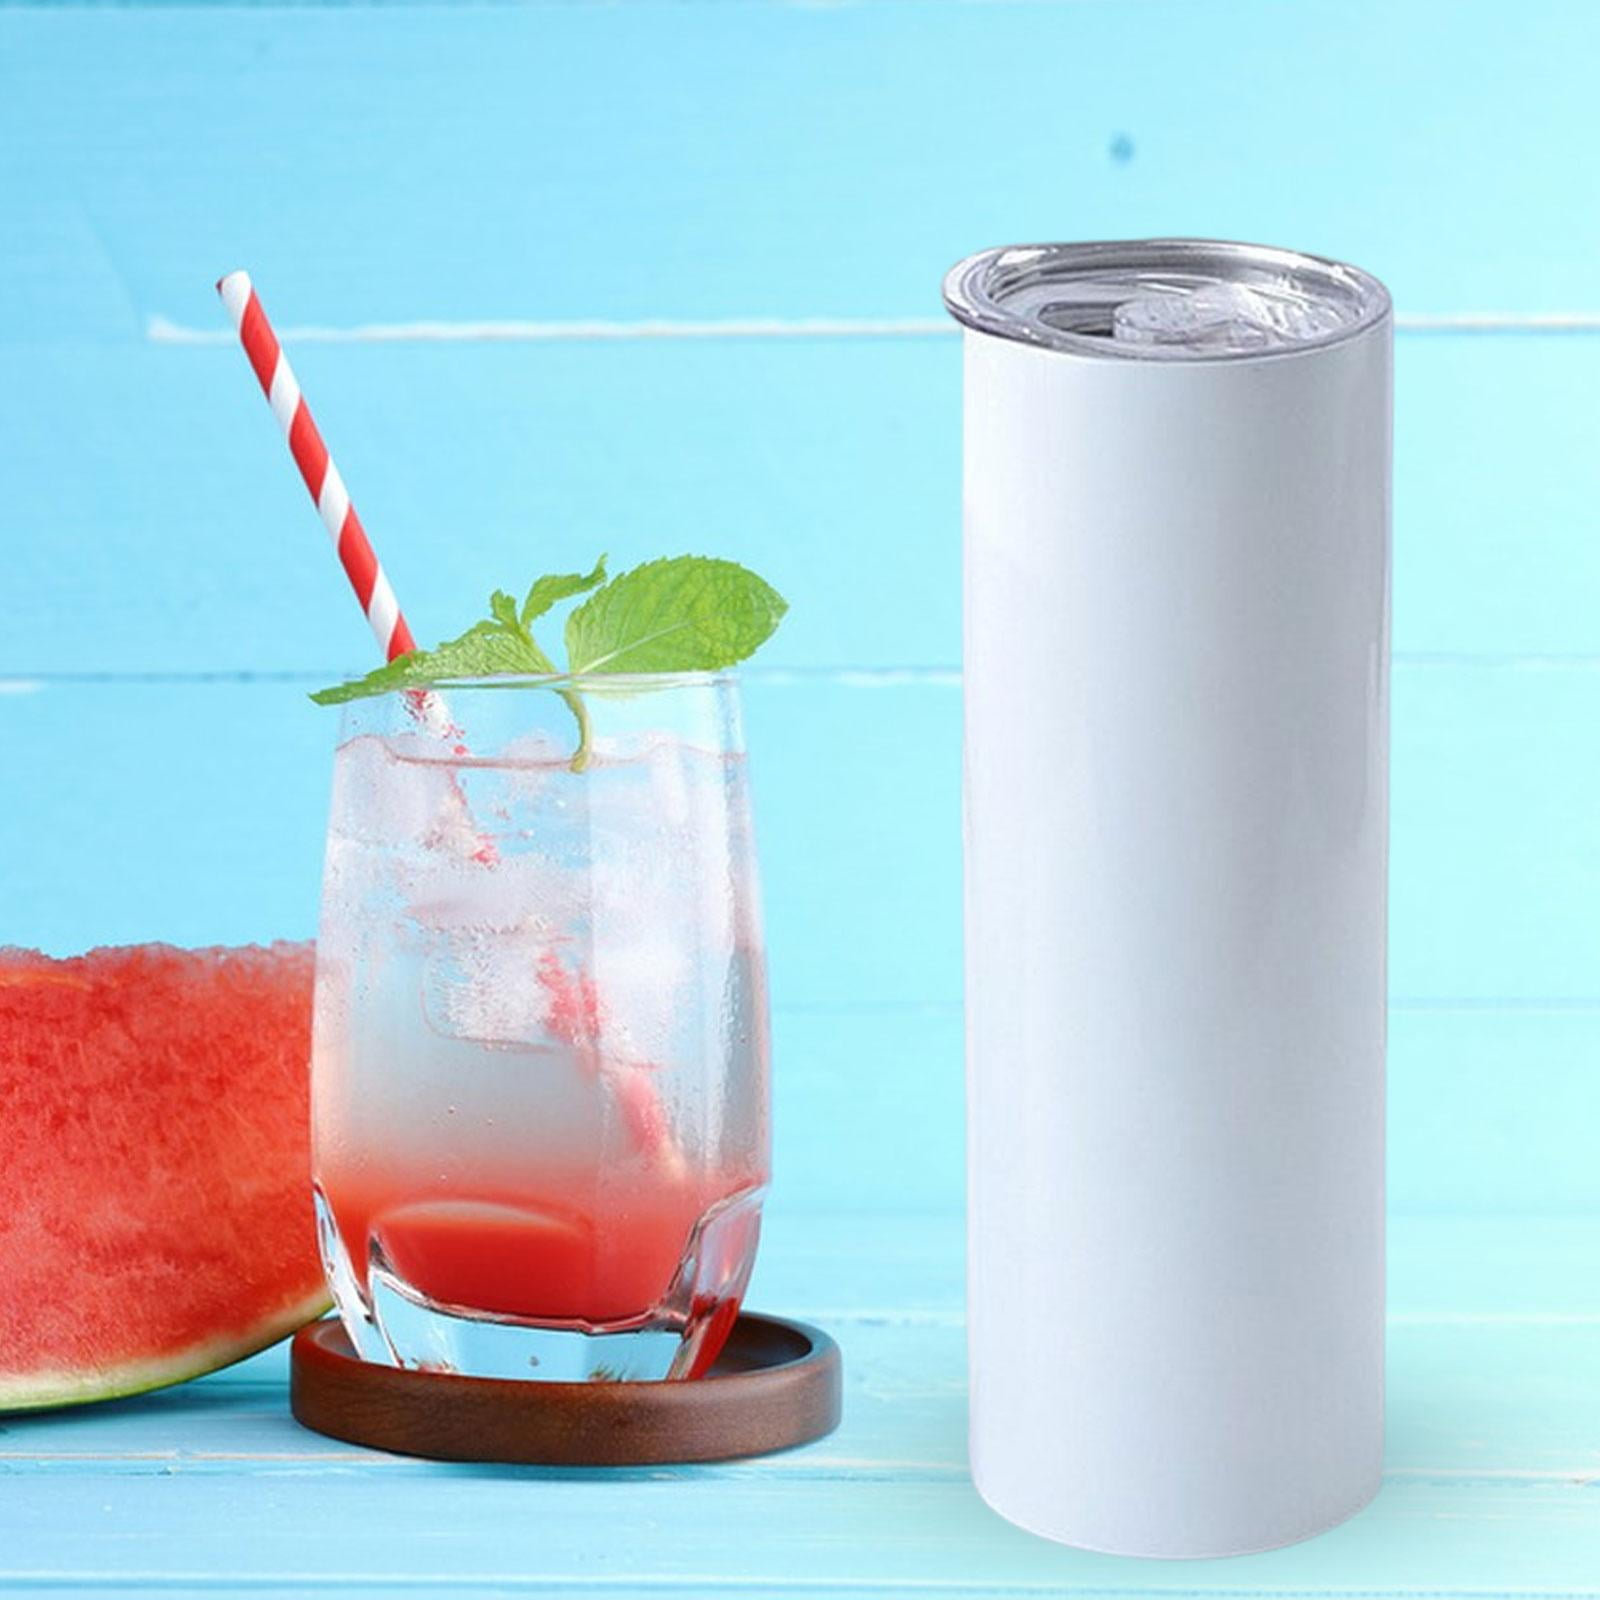 50pcs DIY 20oz Straight Skinny Tumbler Stainless Steel Double Wall  Insulated Sublimation Cups Blank White with Lid Straw - AliExpress